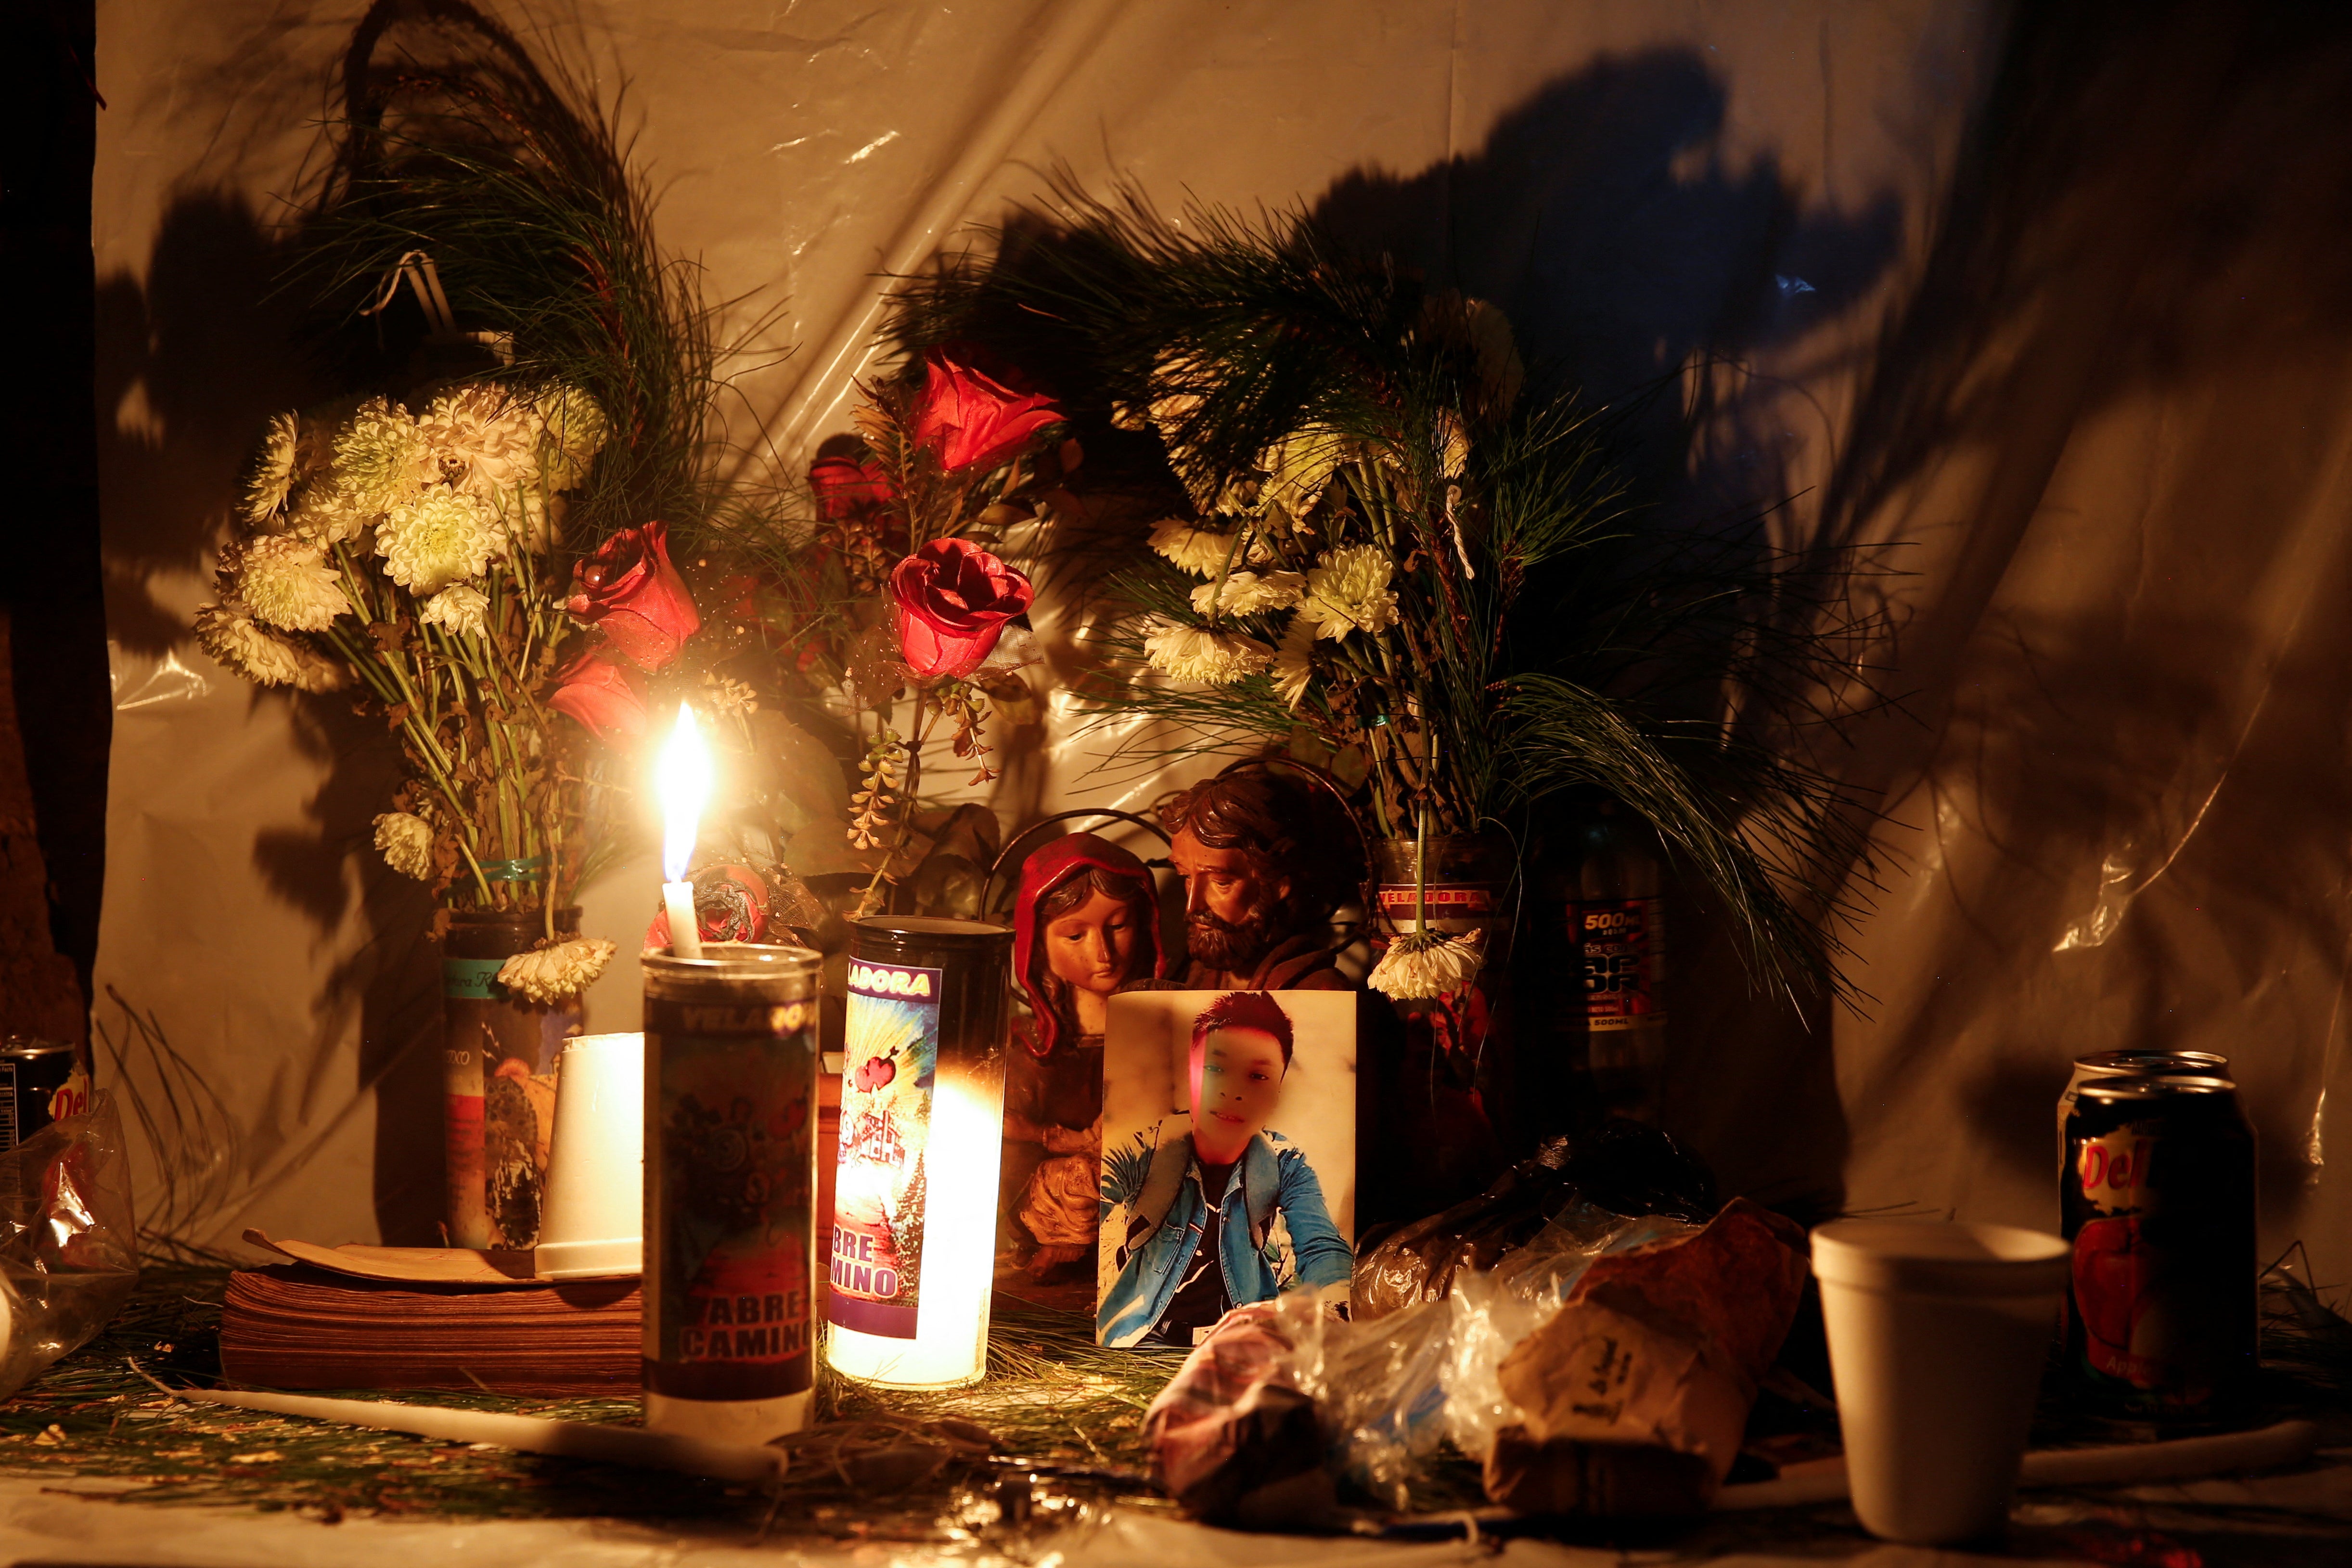 An altar in memory of Domingo Raymundo Mateo, who died in a truck crash in Mexico, in Chajul, Guatemala